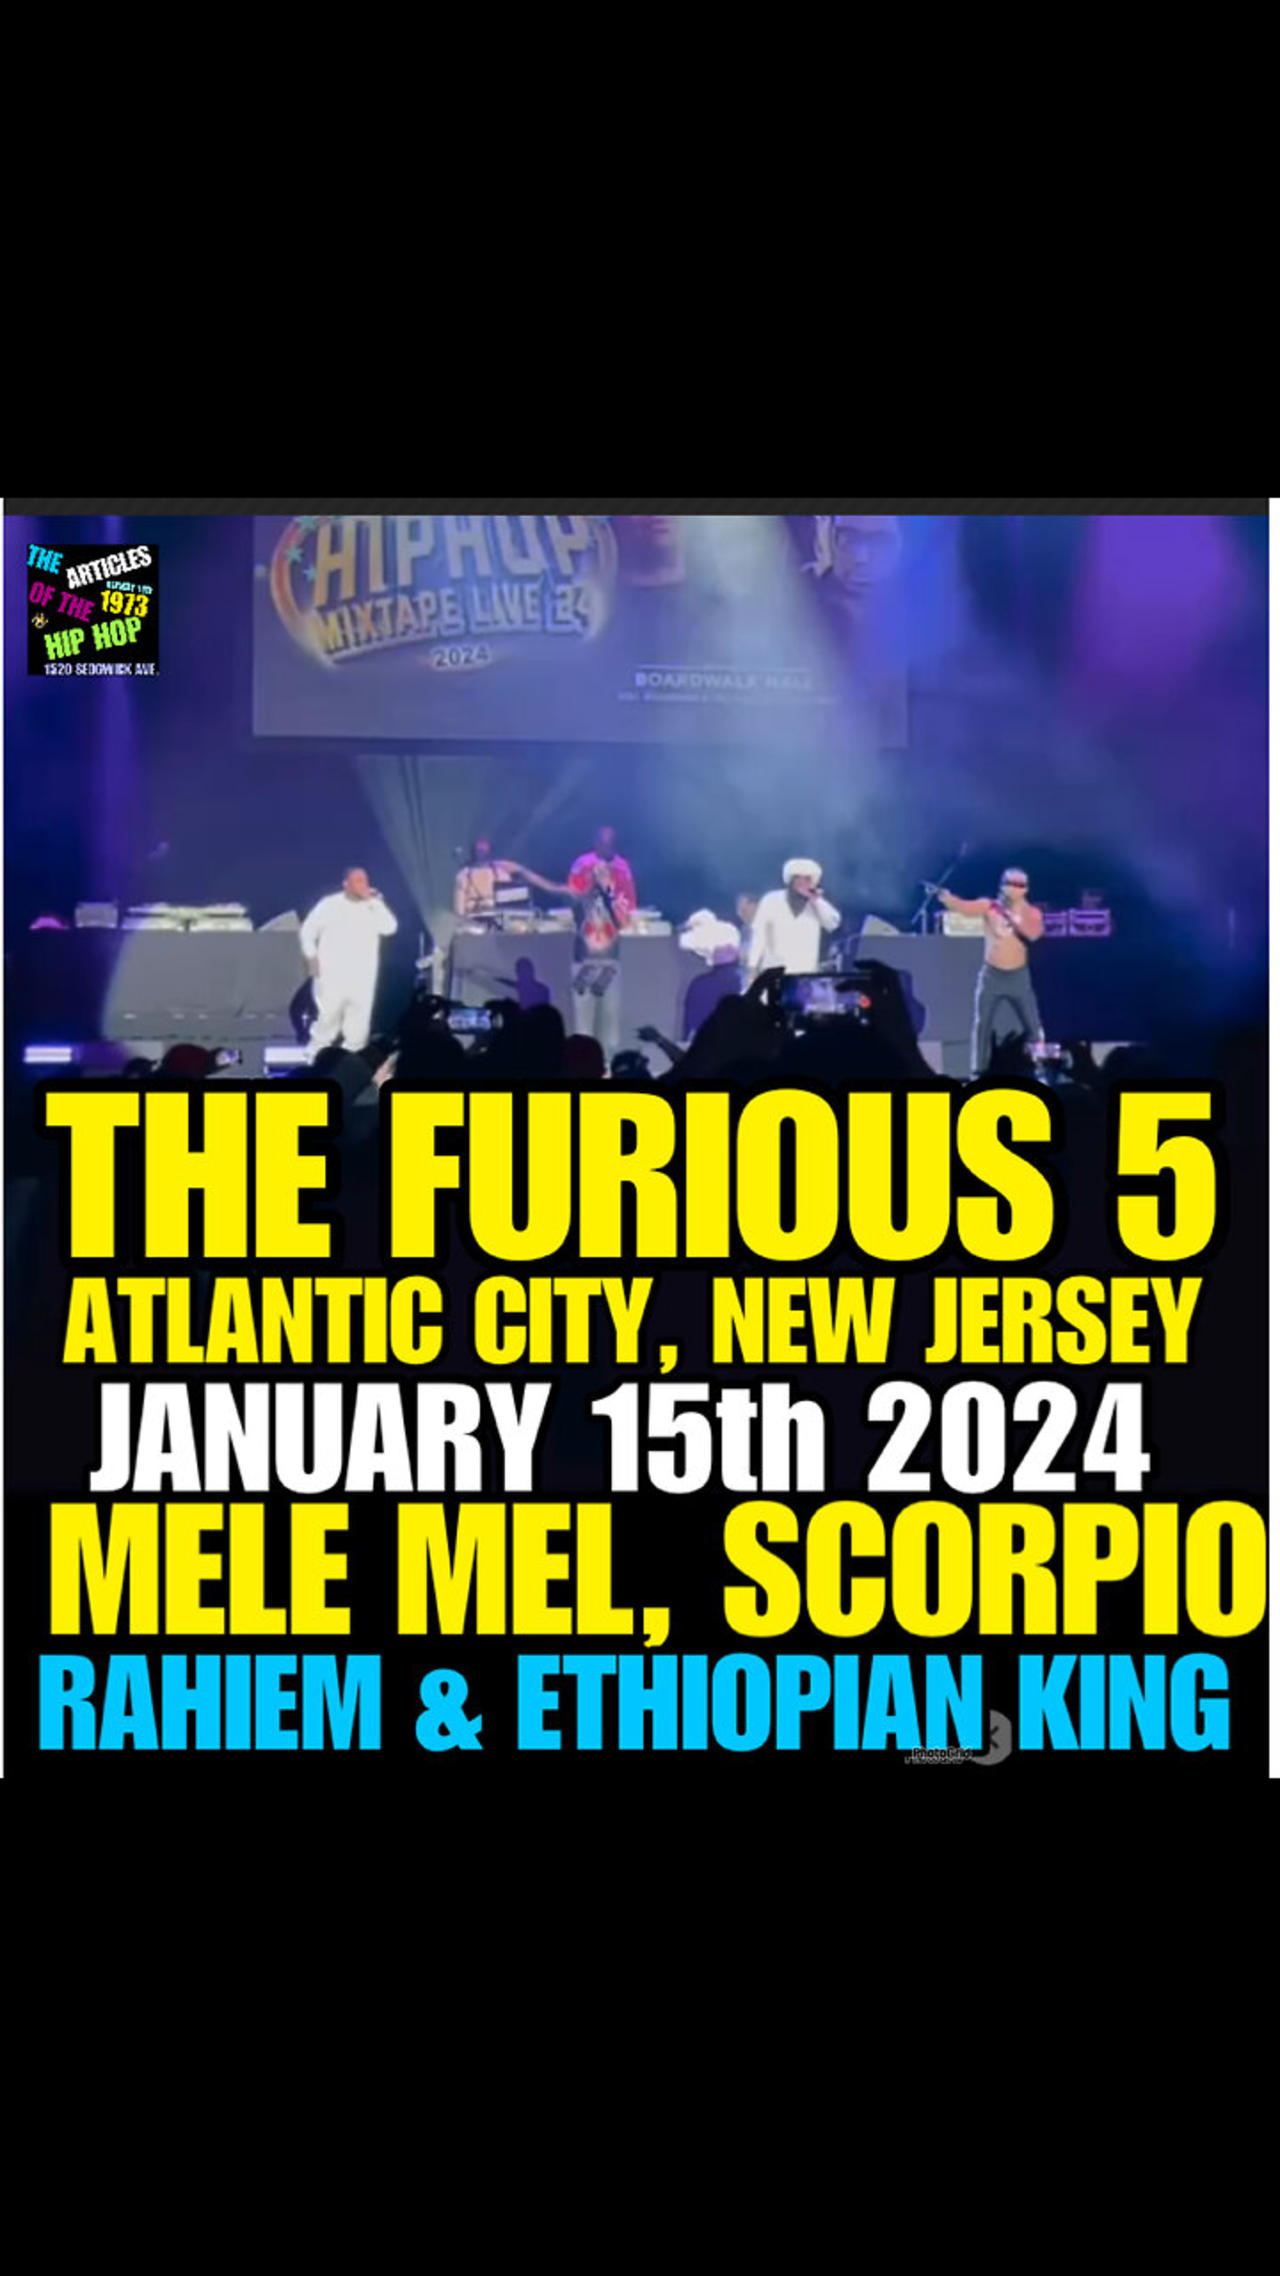 NIMH Ep #756 The Furious 5 performance at Atlantic City January 15th 2024